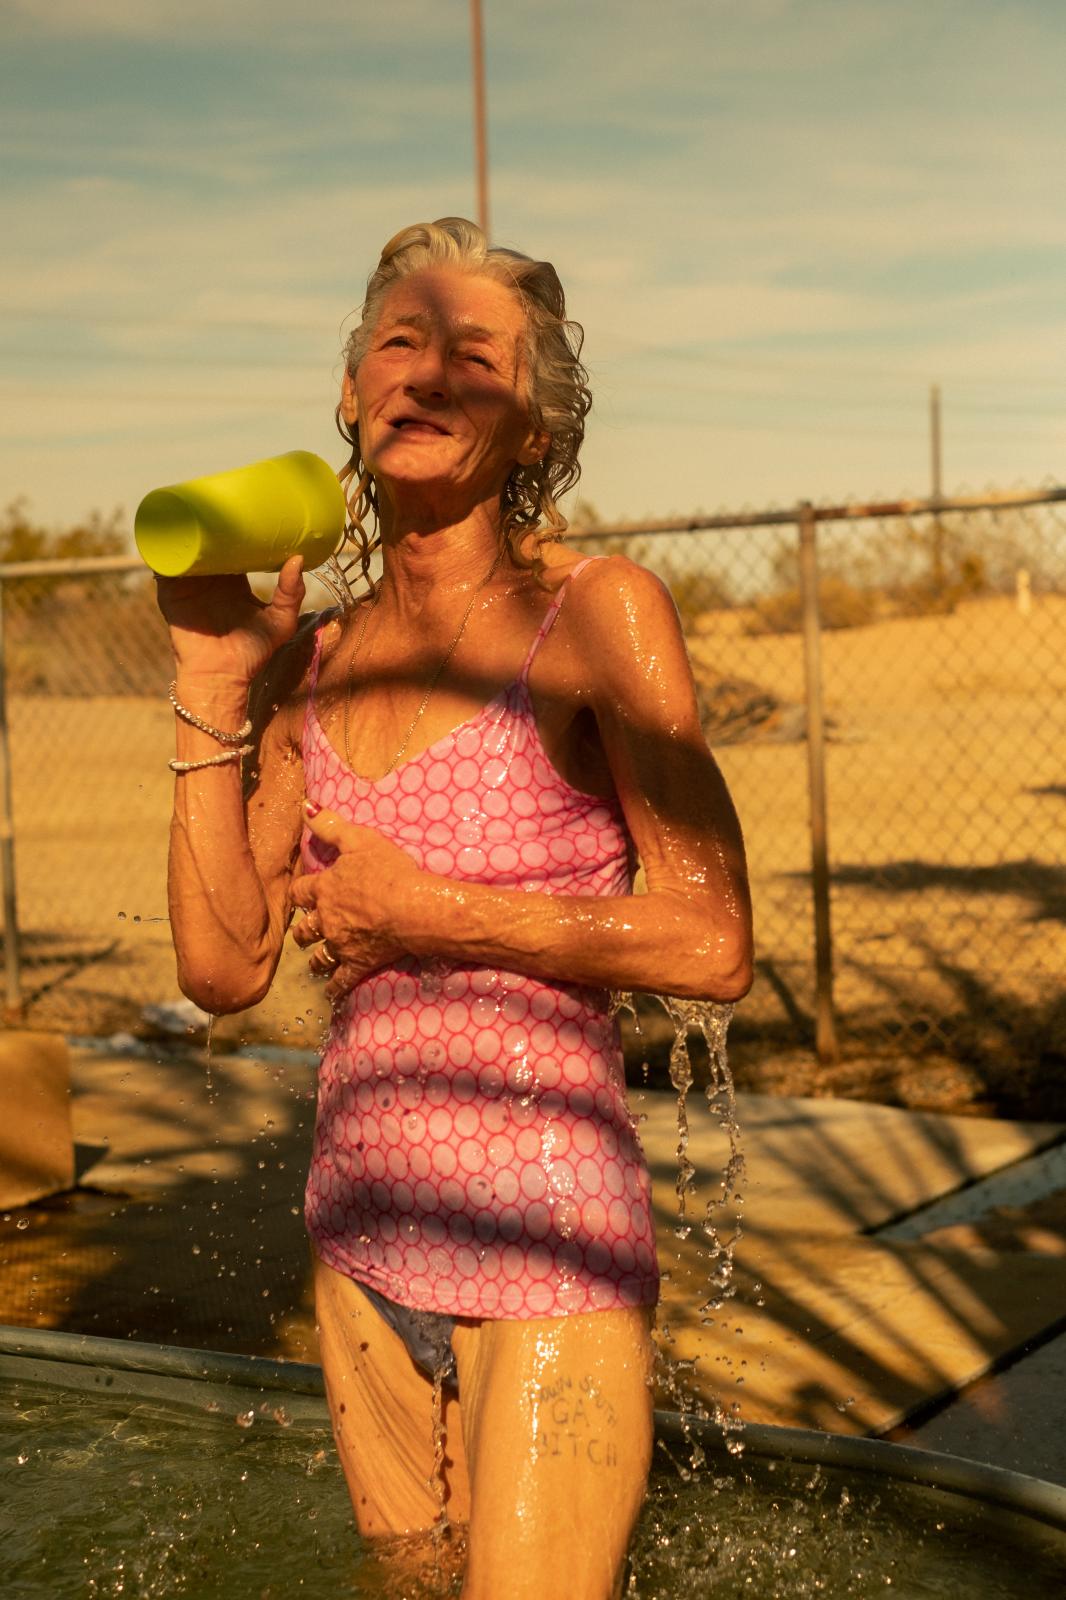 A Warm Winter (Ongoing)  - Darleen at the Hot Springs. Holtville, California